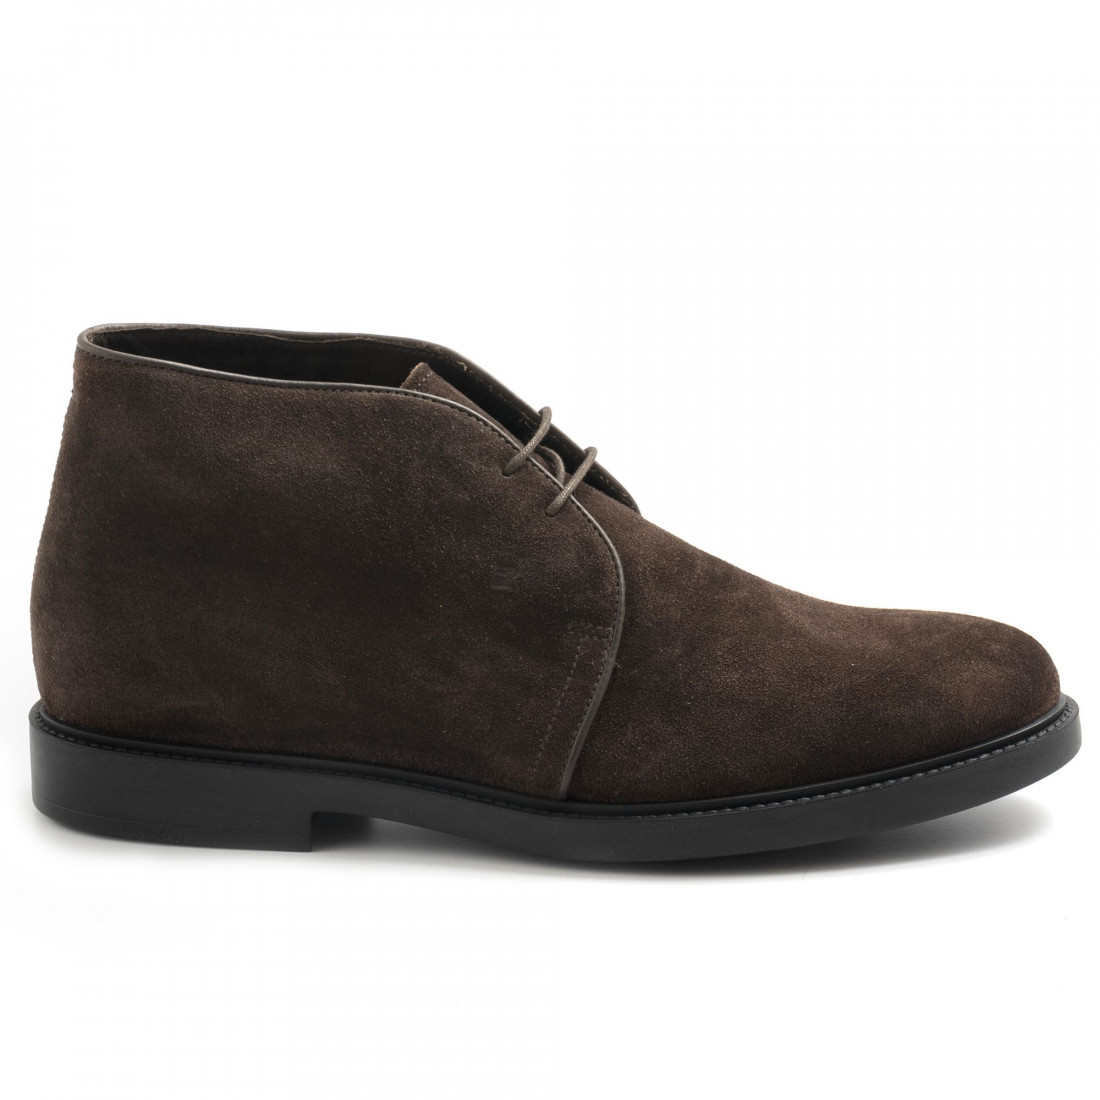 Fratelli Rossetti hi-top lace up shoes in dark brown suede